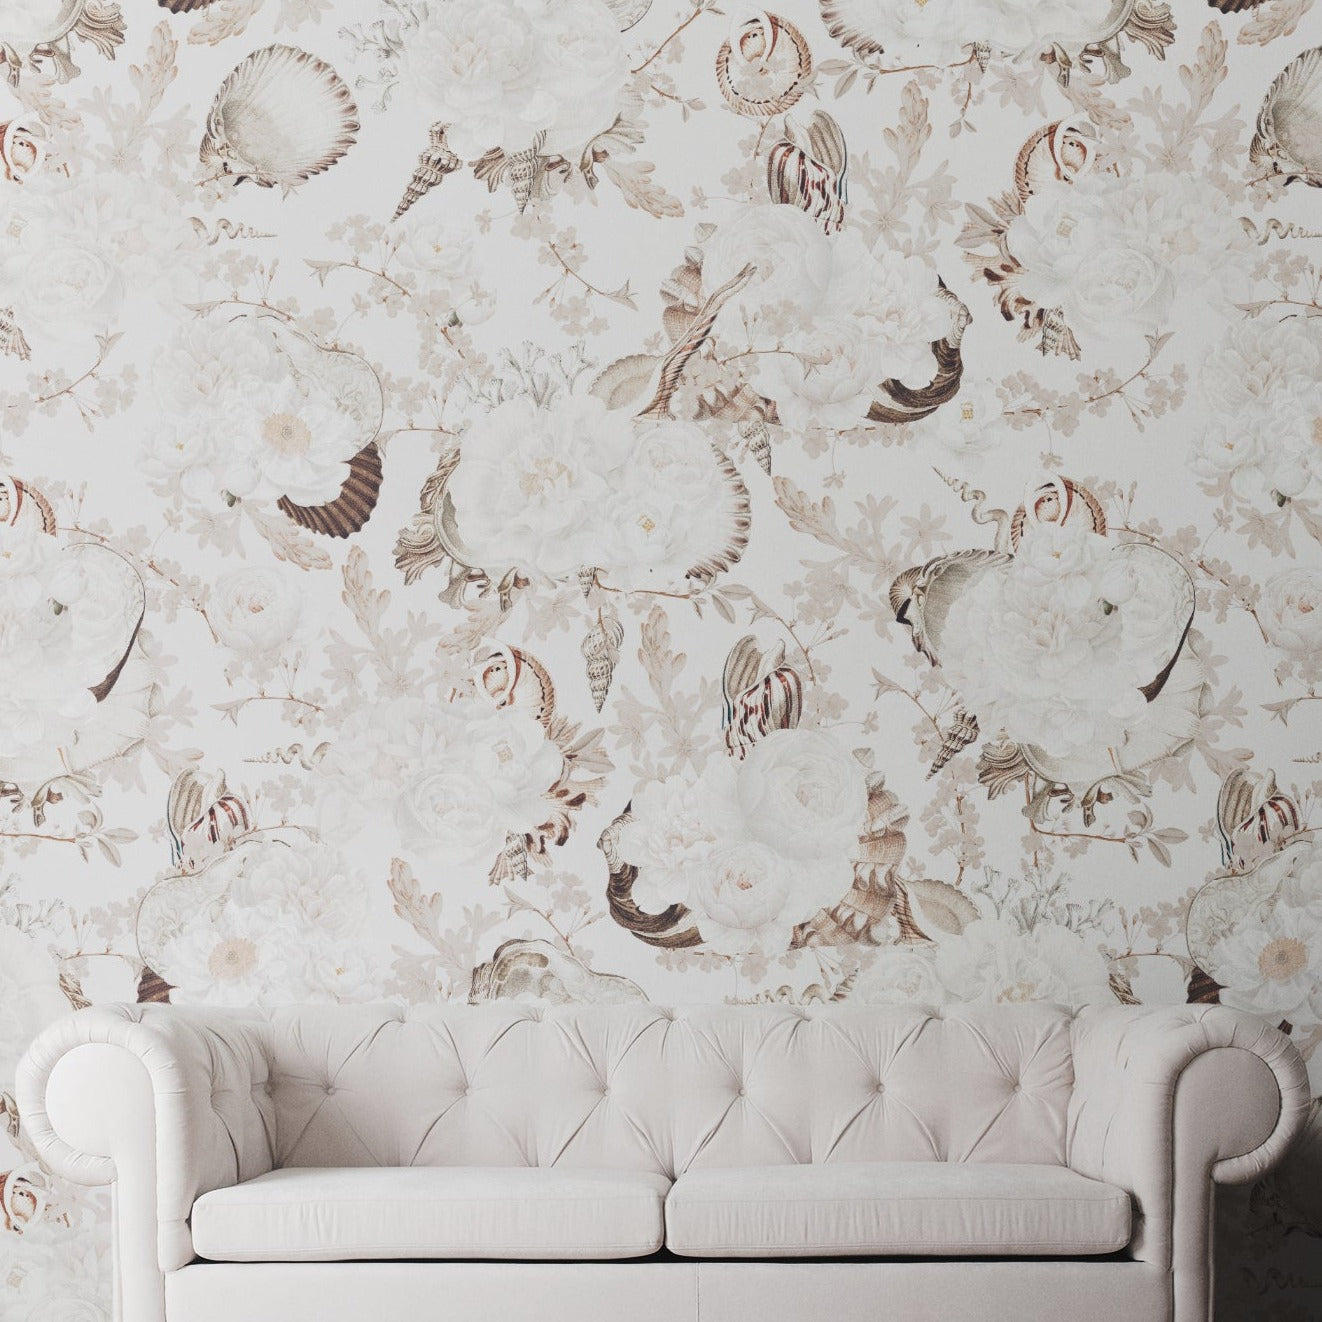 A stylish room with the Modern Aesthetic Wallpaper - Neutral on the wall. The room includes a white tufted sofa, complementing the elegant sea shell and floral wallpaper.